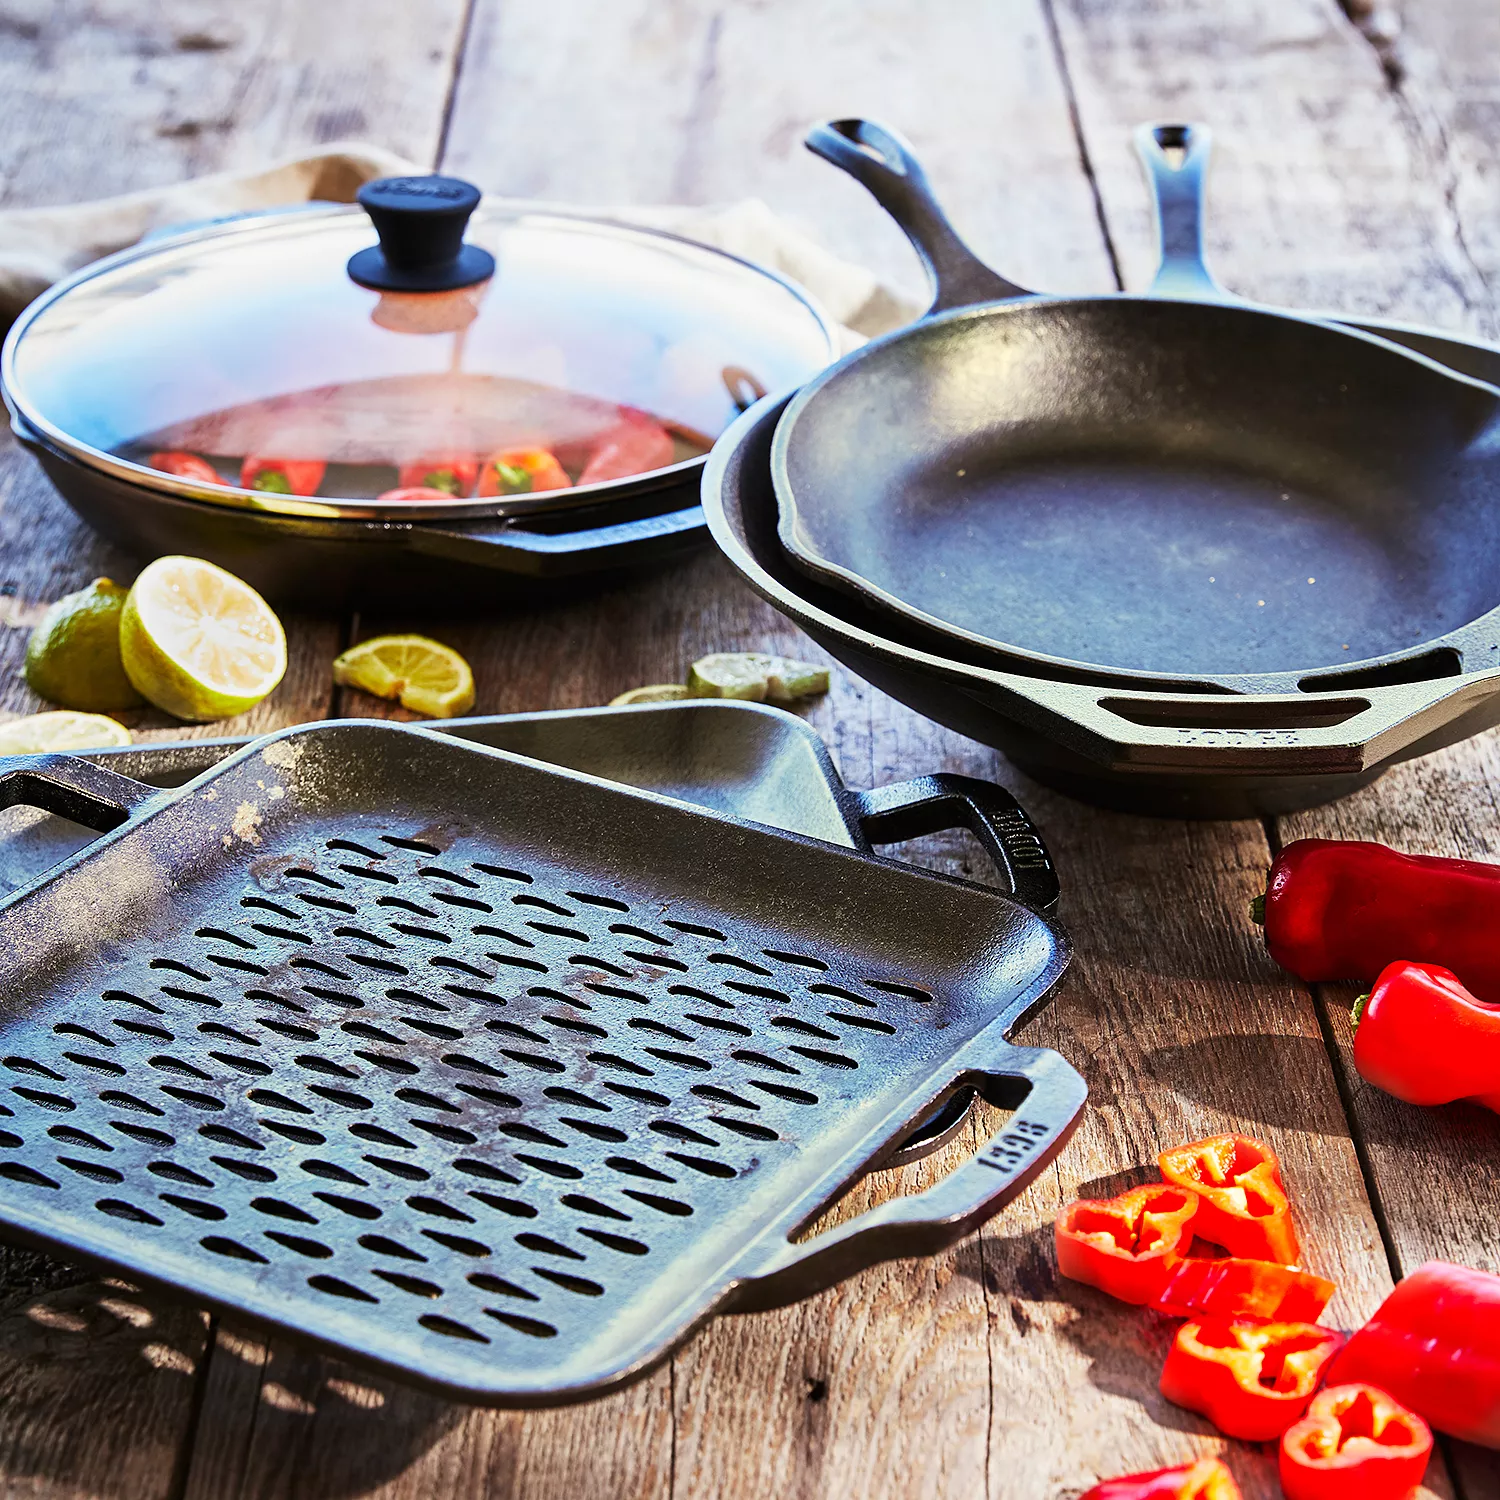 Lodge 7-Piece Essential Pre-Seasoned Cast Iron Skillet Set - Includes 10  1/4 Skillet, 10 1/4 Grill Pan, 10 1/2 Griddle, Silicone Handle Holder,  Silicone Trivet, and Two Pan Scrapers